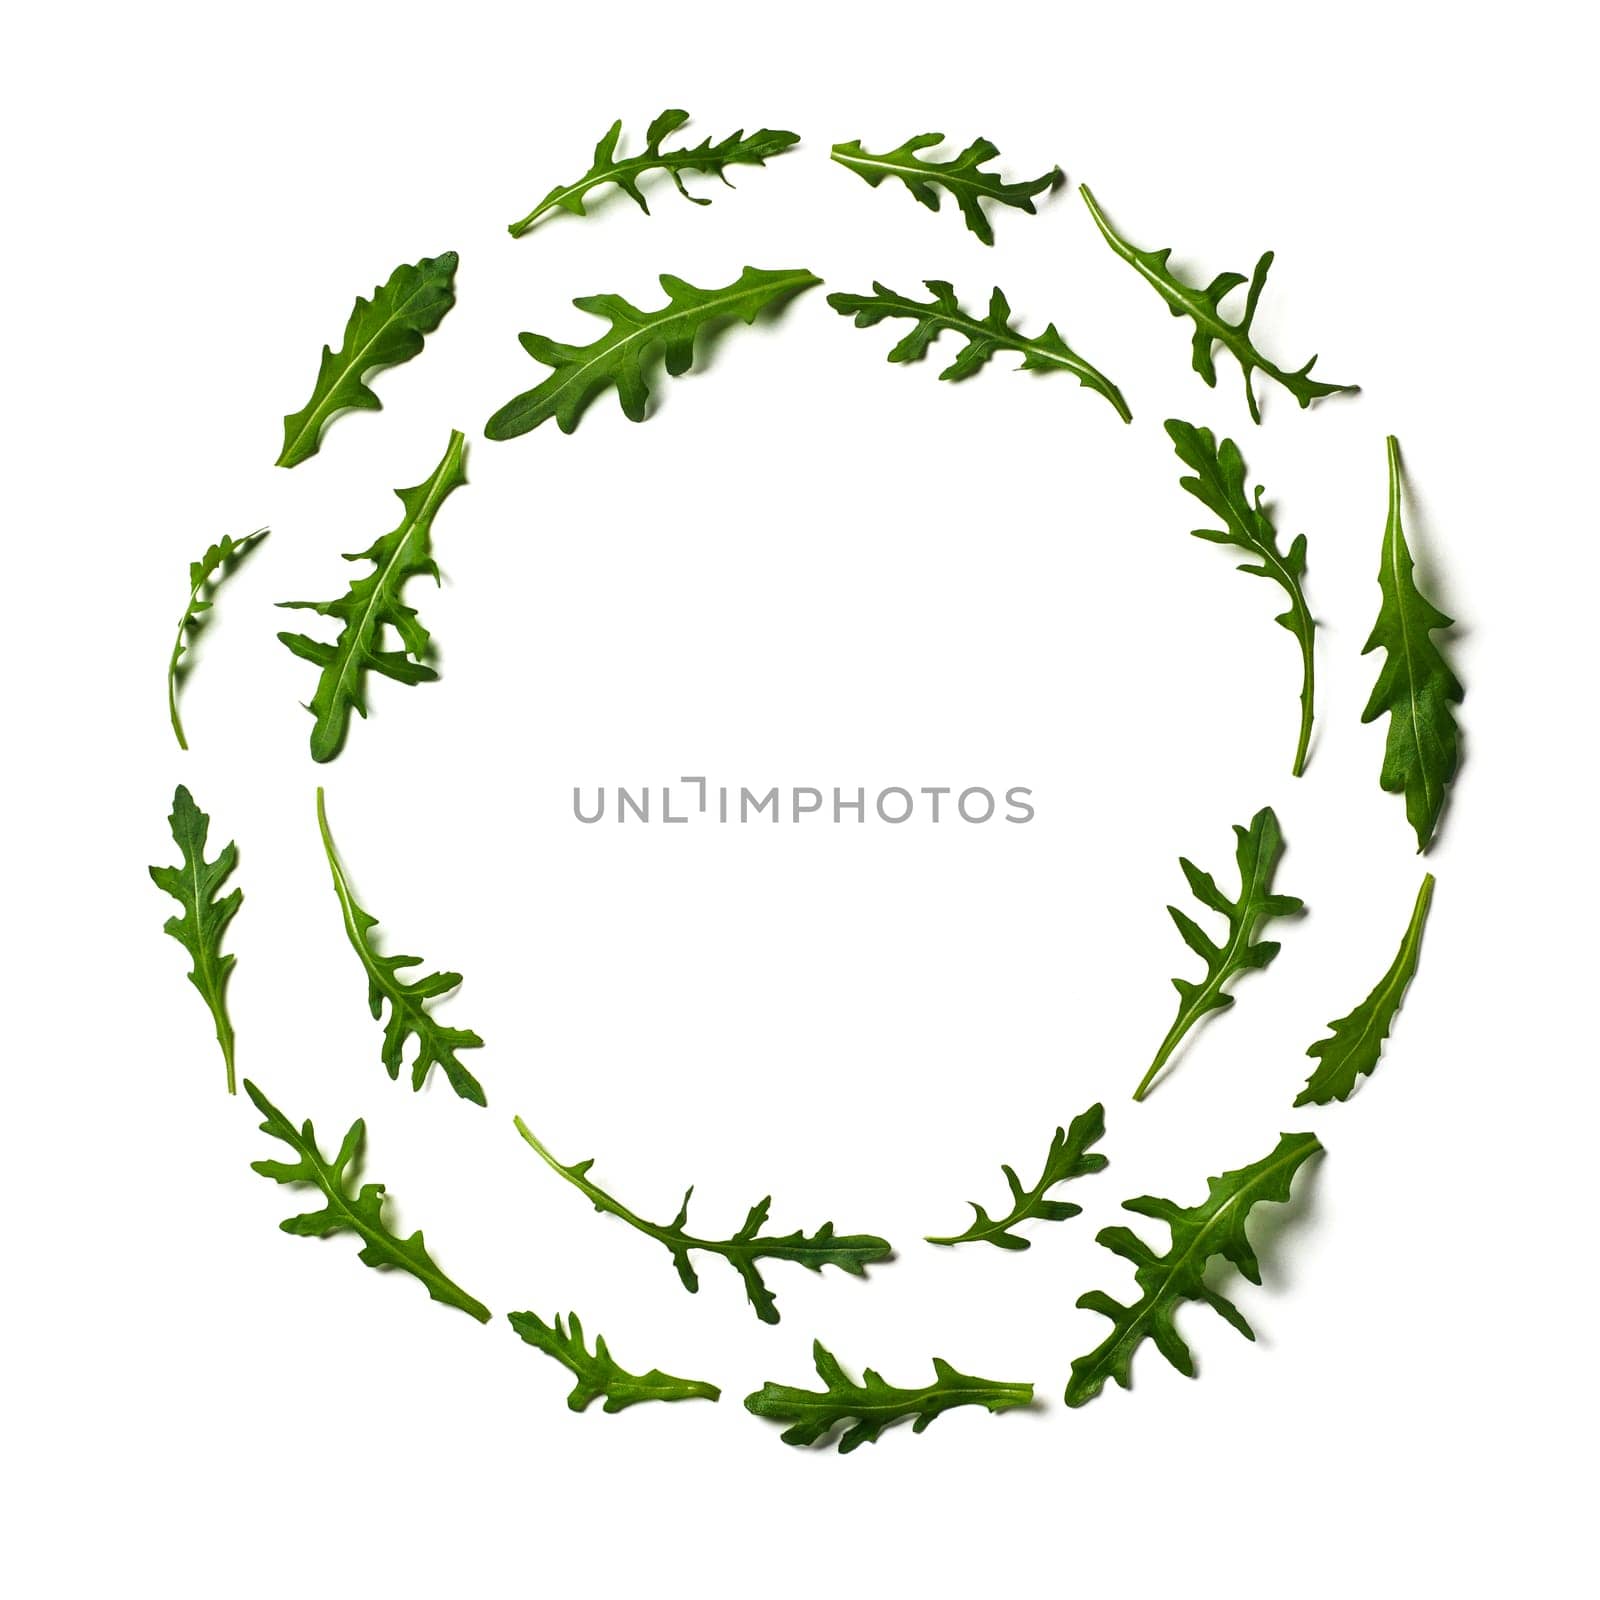 Pattern from arugula in round circle frame isolated. Circle shape in fresh green ruccola or arugula. Isolated on white with clipping path. Top view or flat lay. Can use for design vegan concept